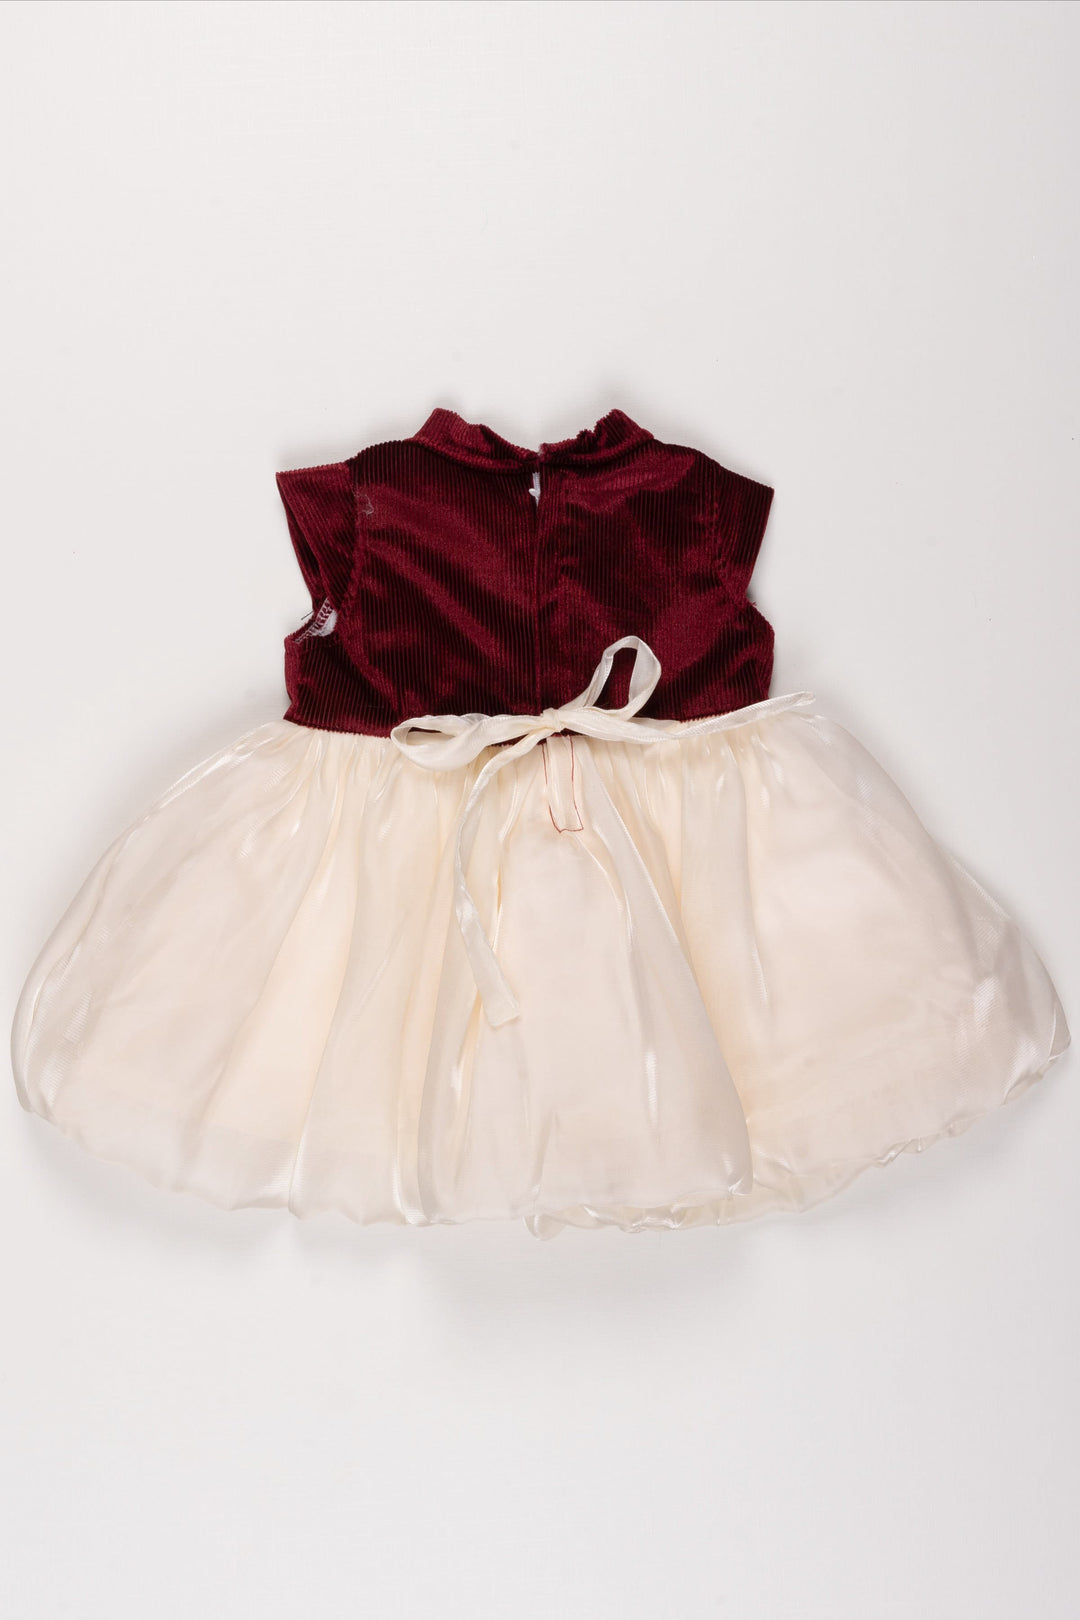 The Nesavu Girls Fancy Party Frock Maroon and Ivory Tulle Party Dress with Satin Bow for Girls Nesavu 10 (NB) / Maroon / Organza PF168B-10 Girls Maroon Tulle Dress | Satin Bow Sophisticated Party Dress | The Nesavu